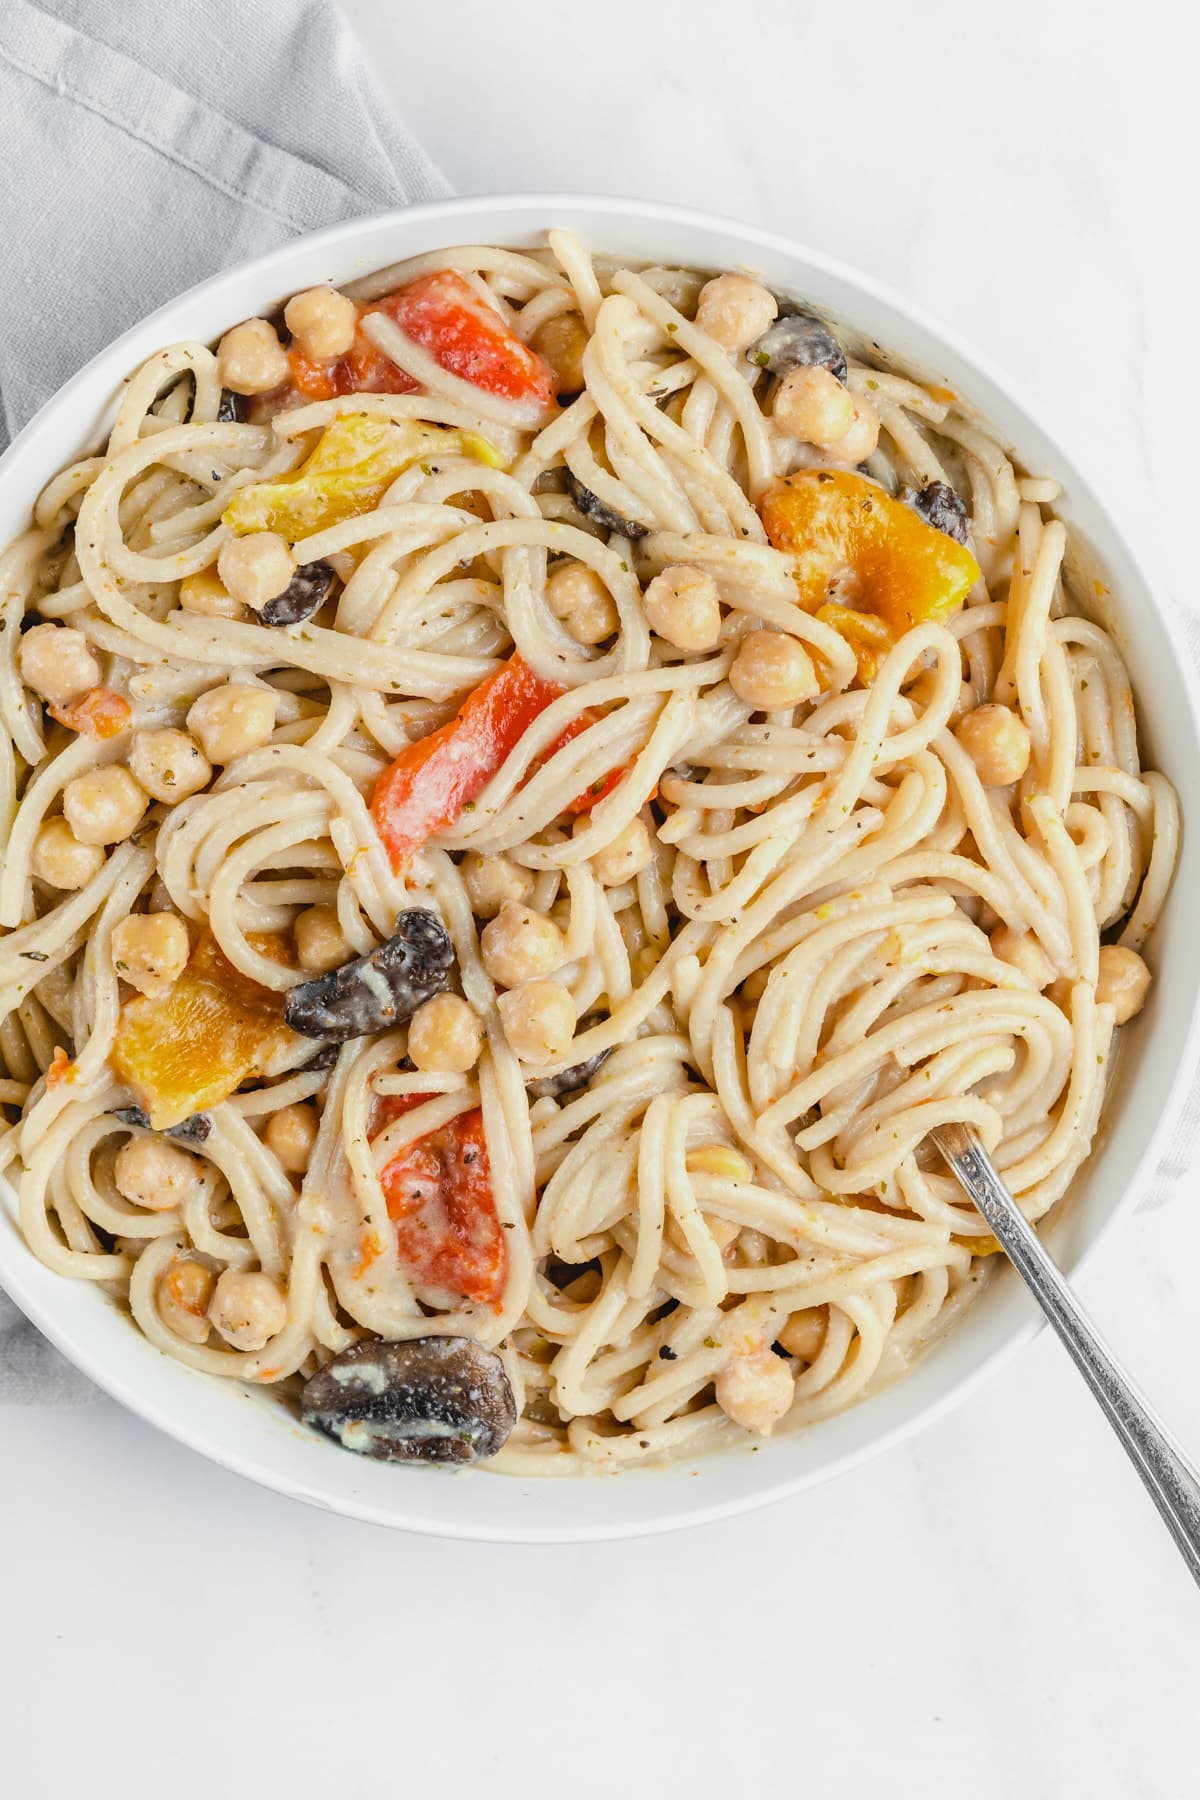 Pasta with peppers and chickpeas in a bowl.